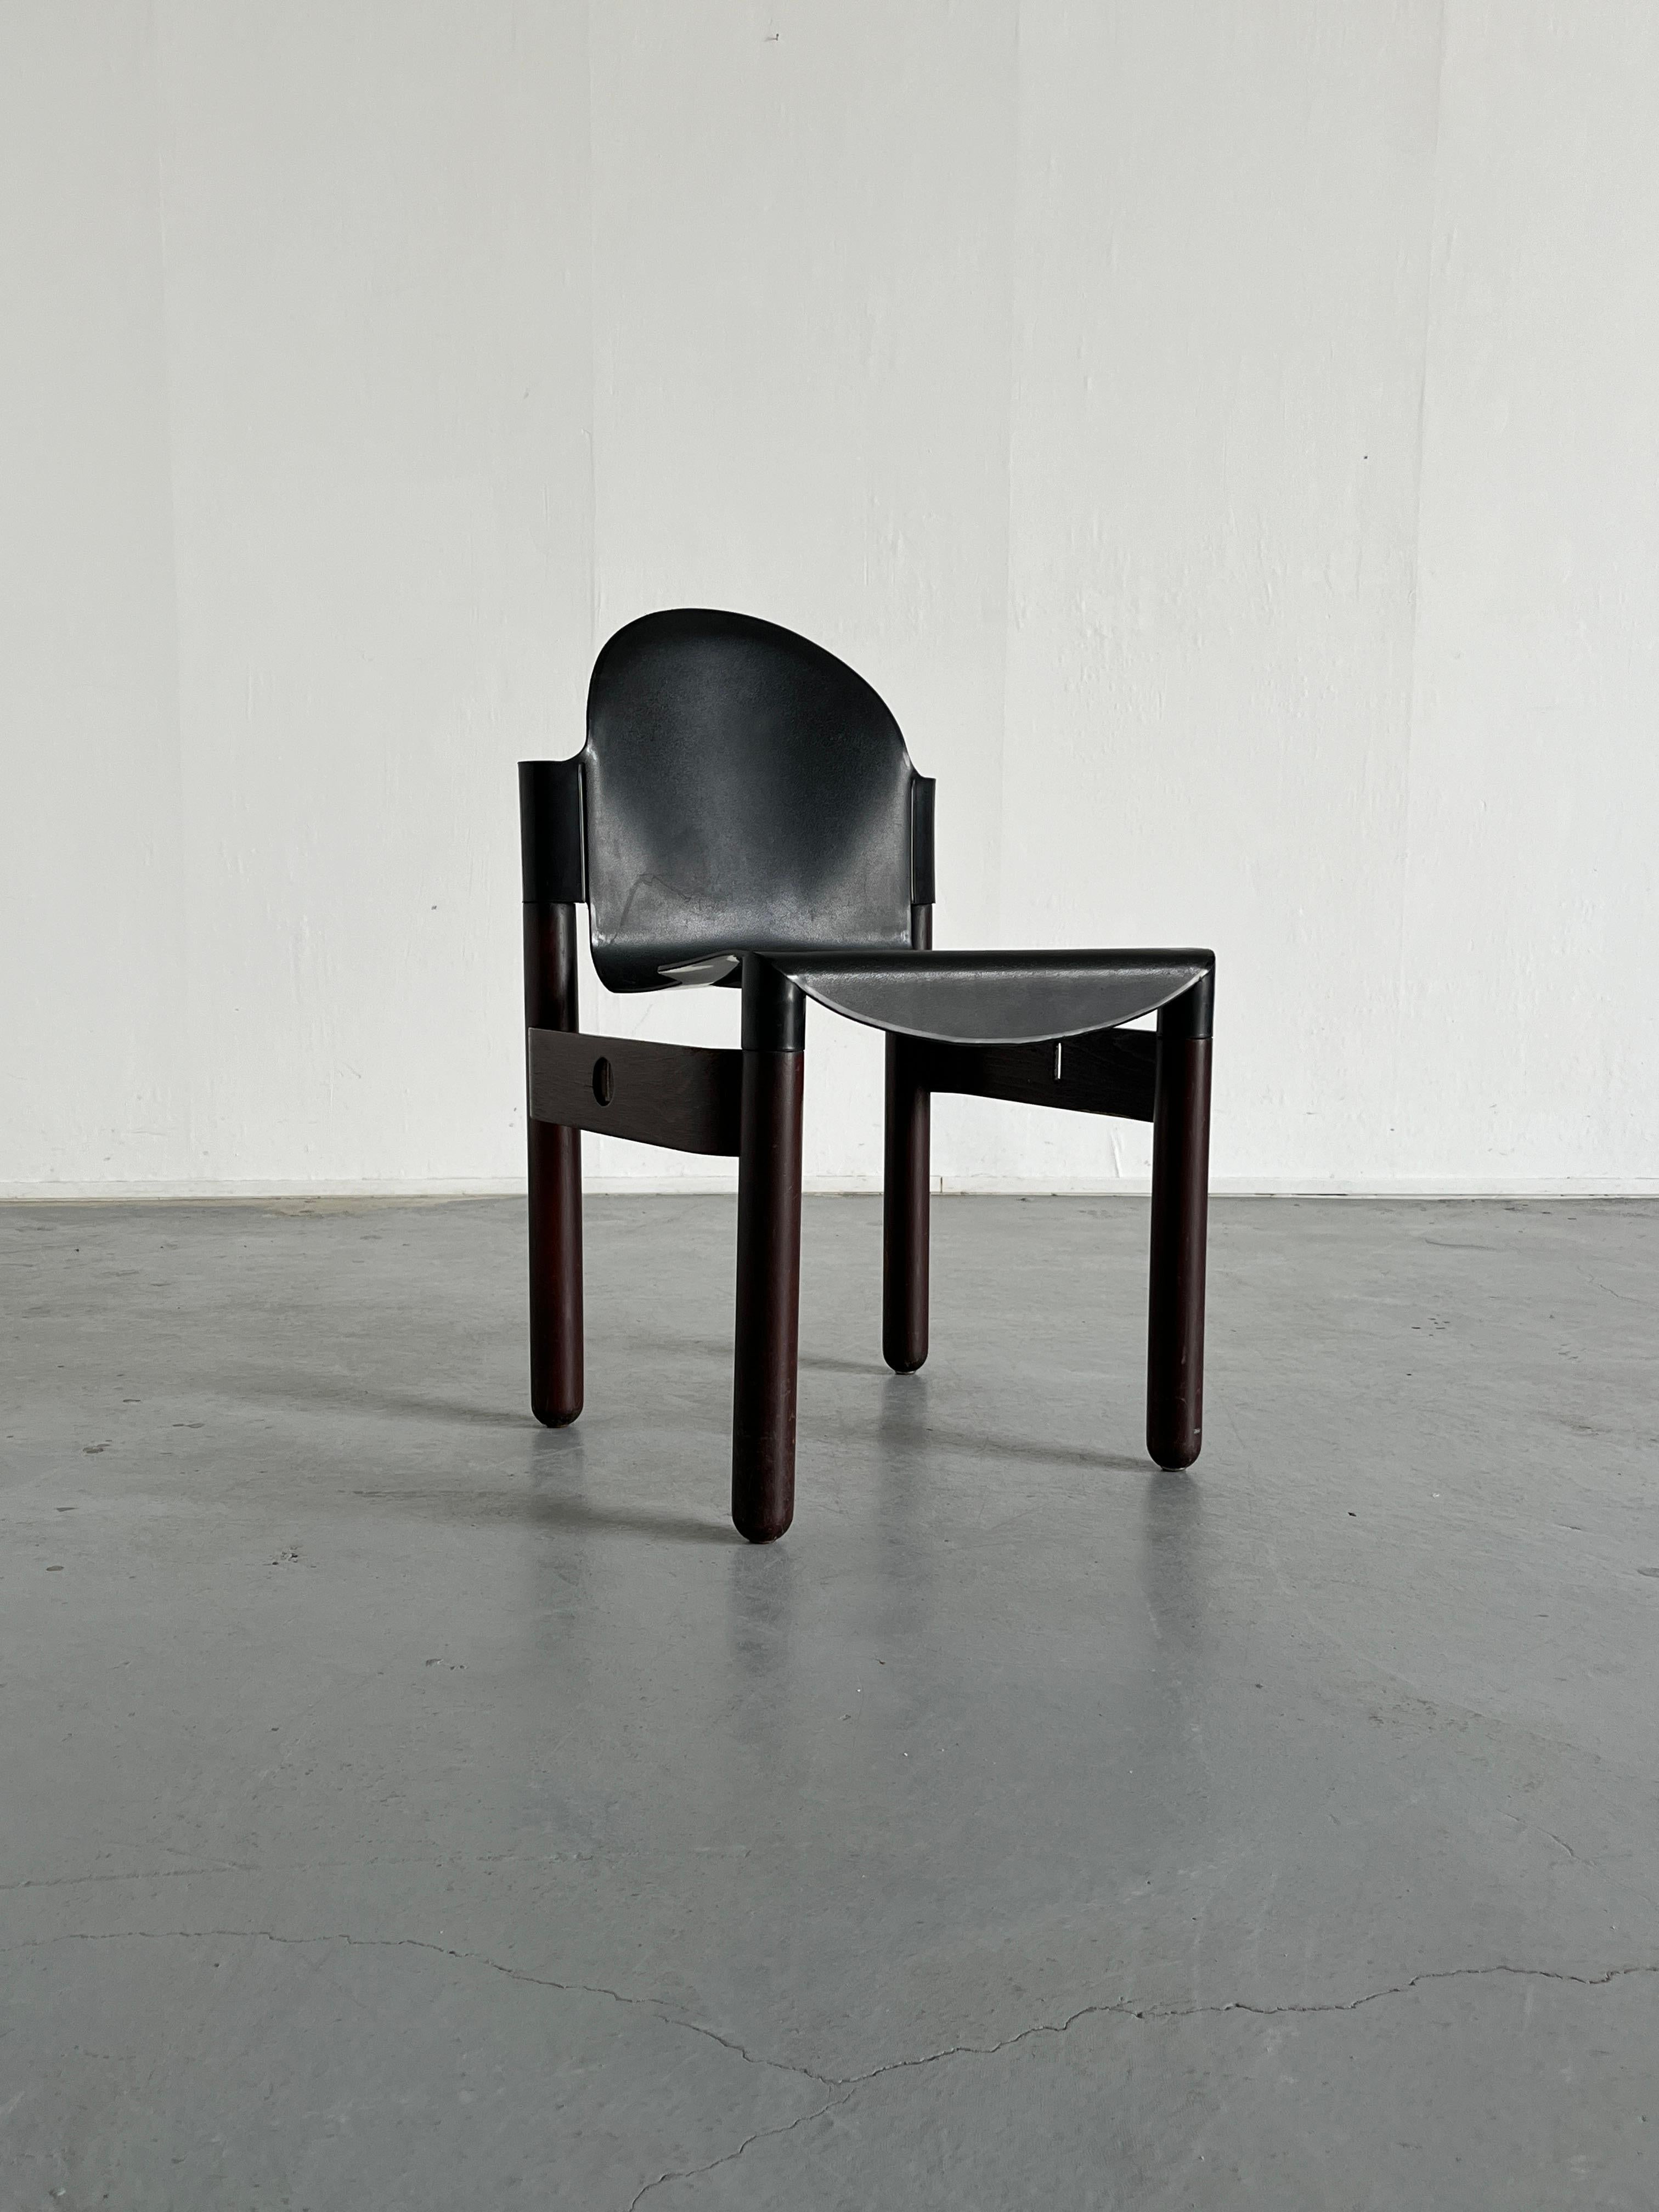 A vintage Thonet Flex 2000 chair, designed by Gerd Lange for Thonet and produced by Thonet in 1994. 
Rare black edition.
Stamped.
Comfortable and quality made. Flexible plastic seat. Lightweight. 

Overall in good vintage condition, with expected